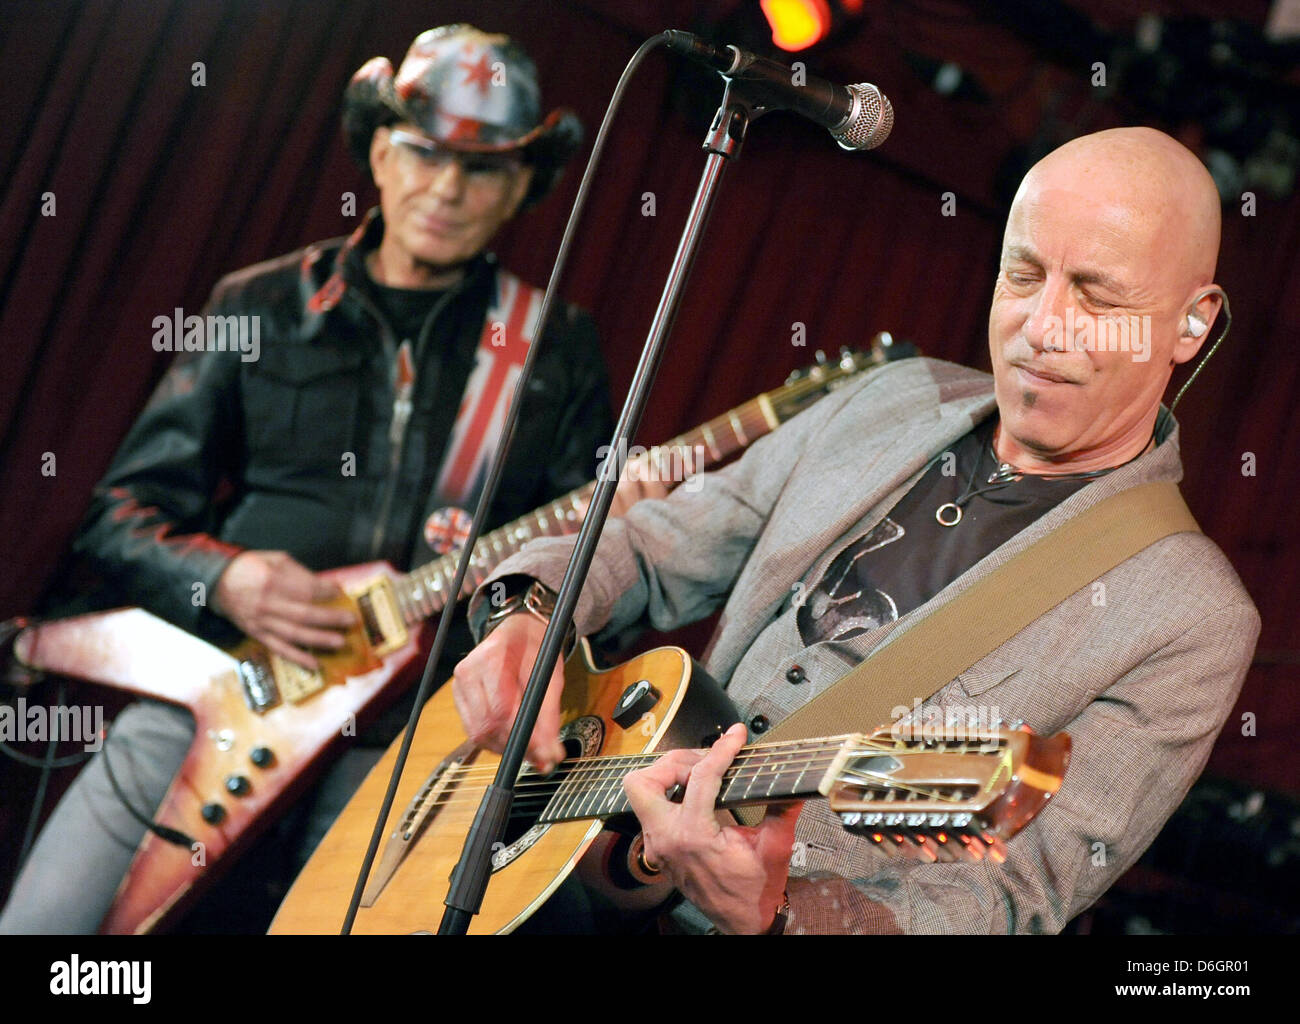 Guitarist Fritz Puppel (L) and singer Toni Krahl from the band City perform in the Red Salon at the Volksbuehne in Berlin, Germany, 22 February 2012. The group is celebrating the 40th anniversary of their formation. The new album "Fuer immer jung" comes out on 24 February 2012. Photo: Britta Pedersen Stock Photo